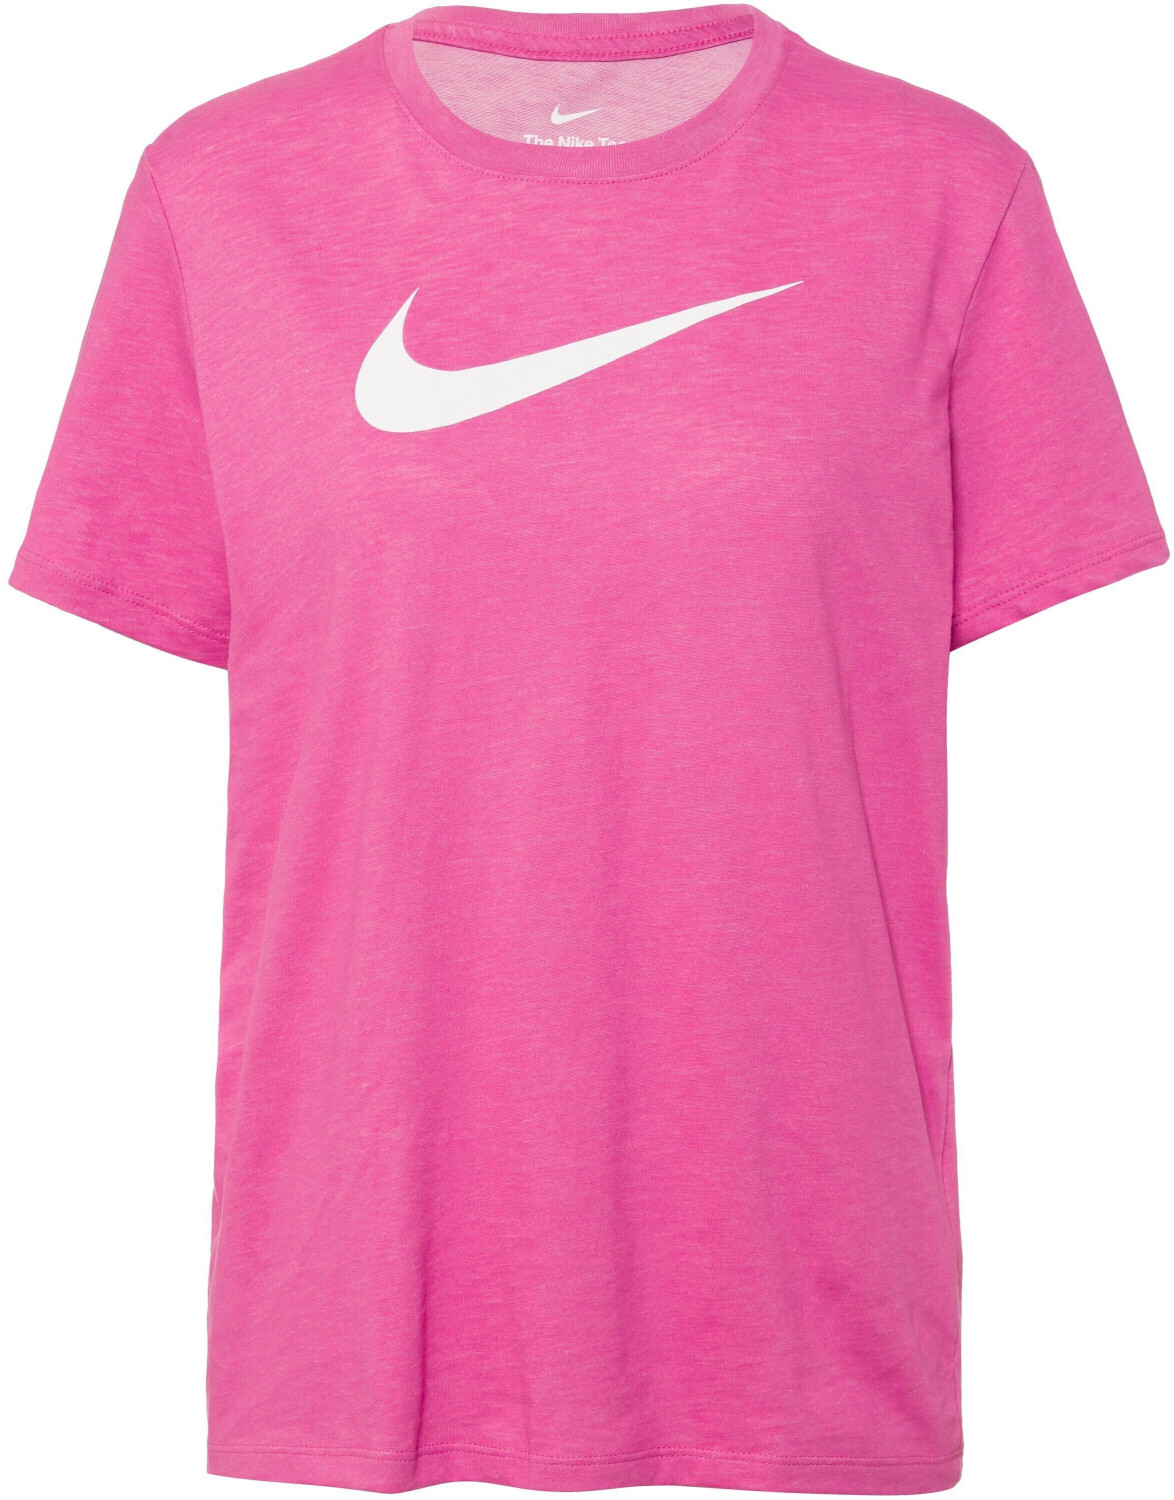 Buy Under Armour Women T-Shirt V-Neck UA Twist Tech electro pink from  £17.99 (Today) – Best Deals on